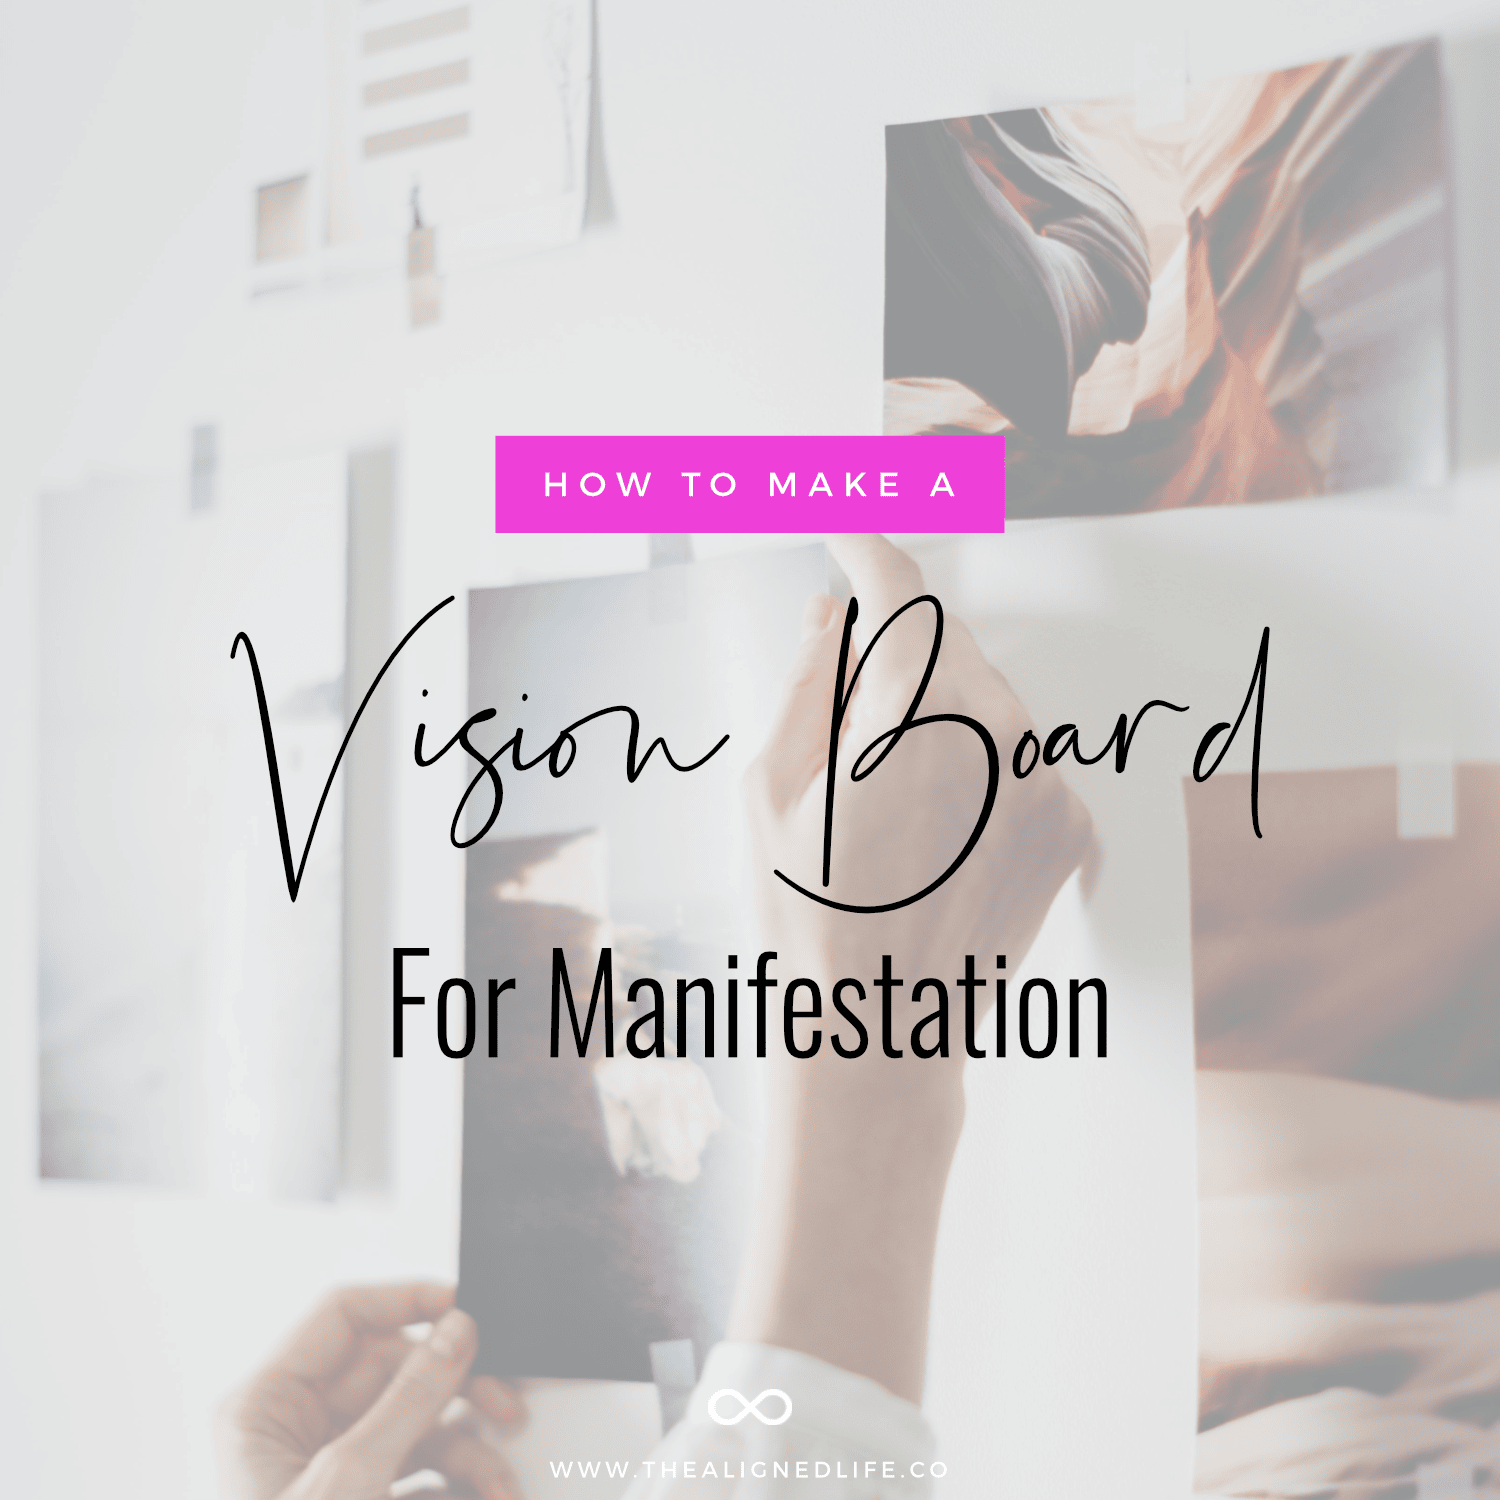 How to Make a Digital Vision Board